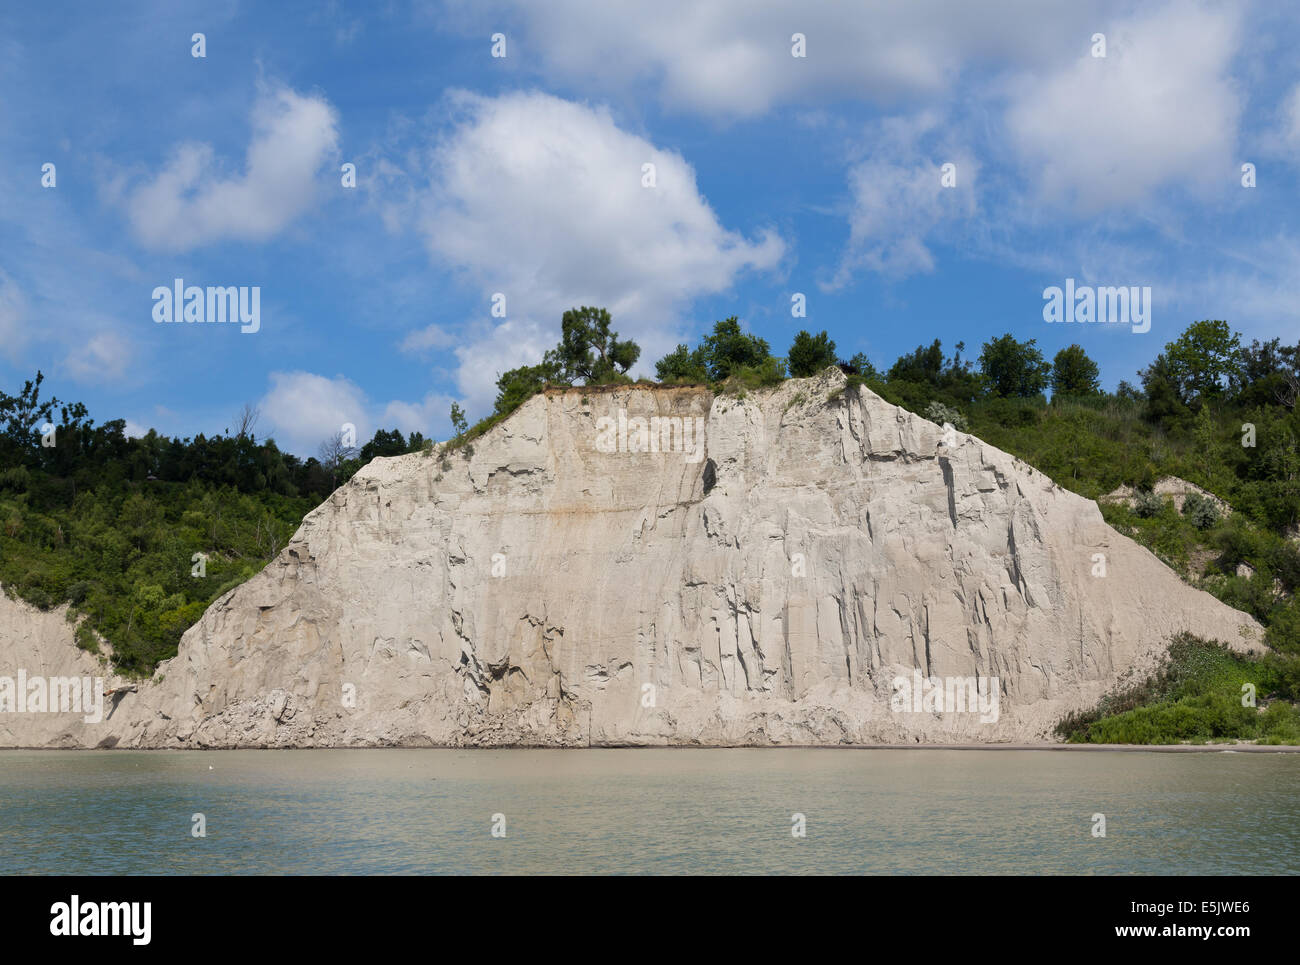 Part of the Scarborough Bluffs cliff face along Lake Ontario Stock Photo